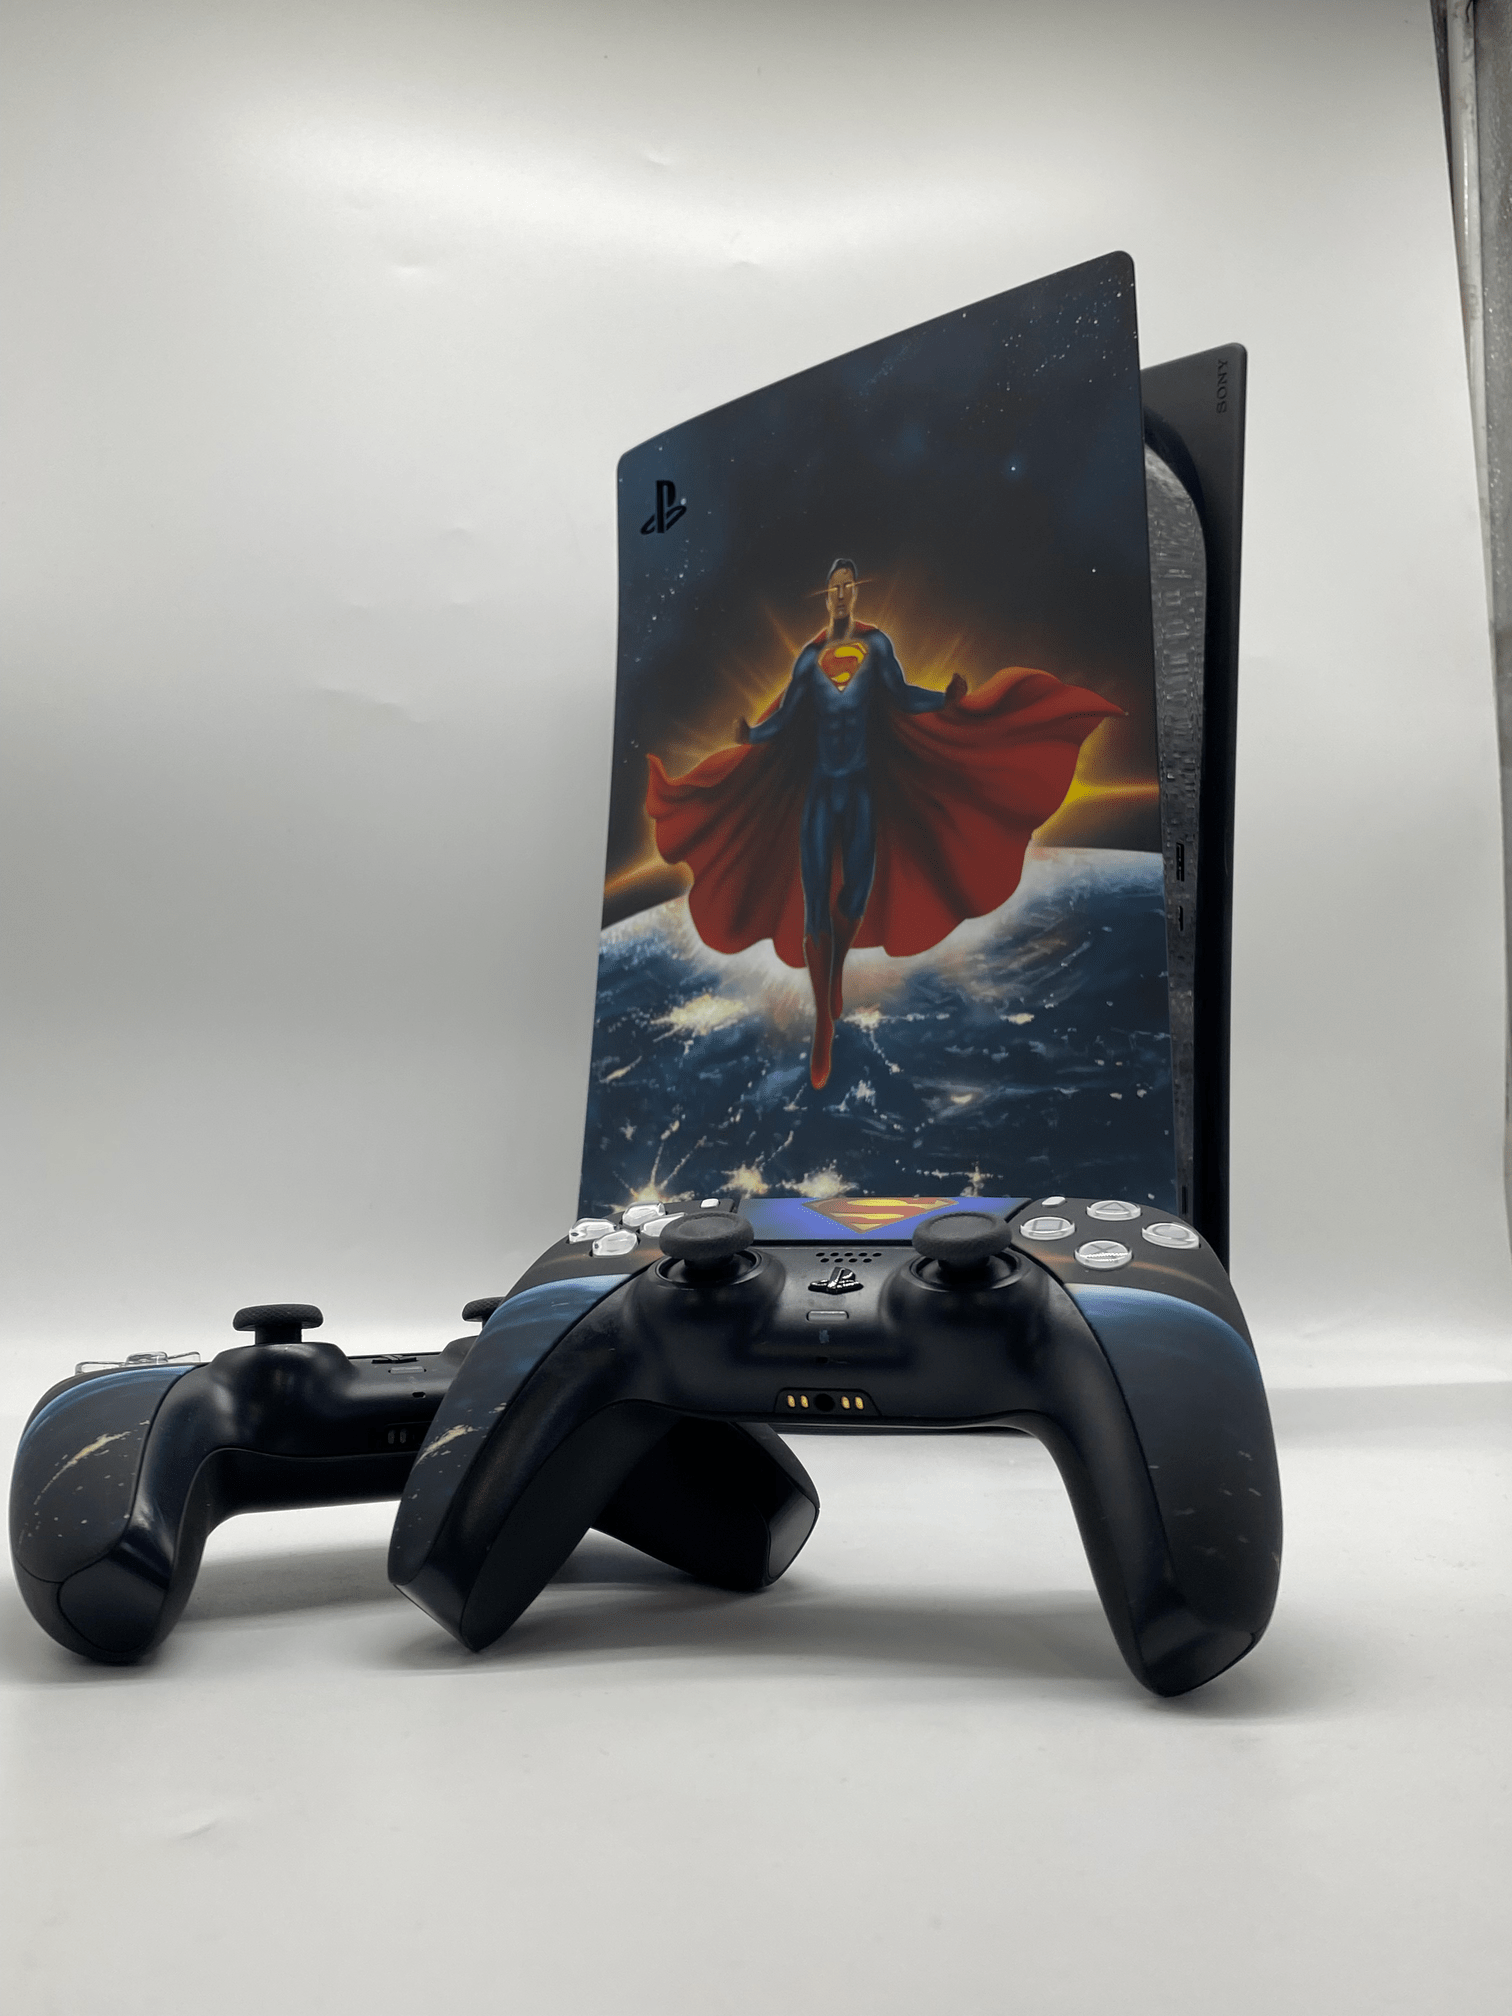 Why buy Playstation 5 stickers when you can paint the Playstation 5 itself? - My, Playstation 5, Dc comics, Playstation, Custom, Airbrushing, Superman, Henry Cavill, Painting, Man of Steel, Zach Snyder, Consoles, Comics, Longpost